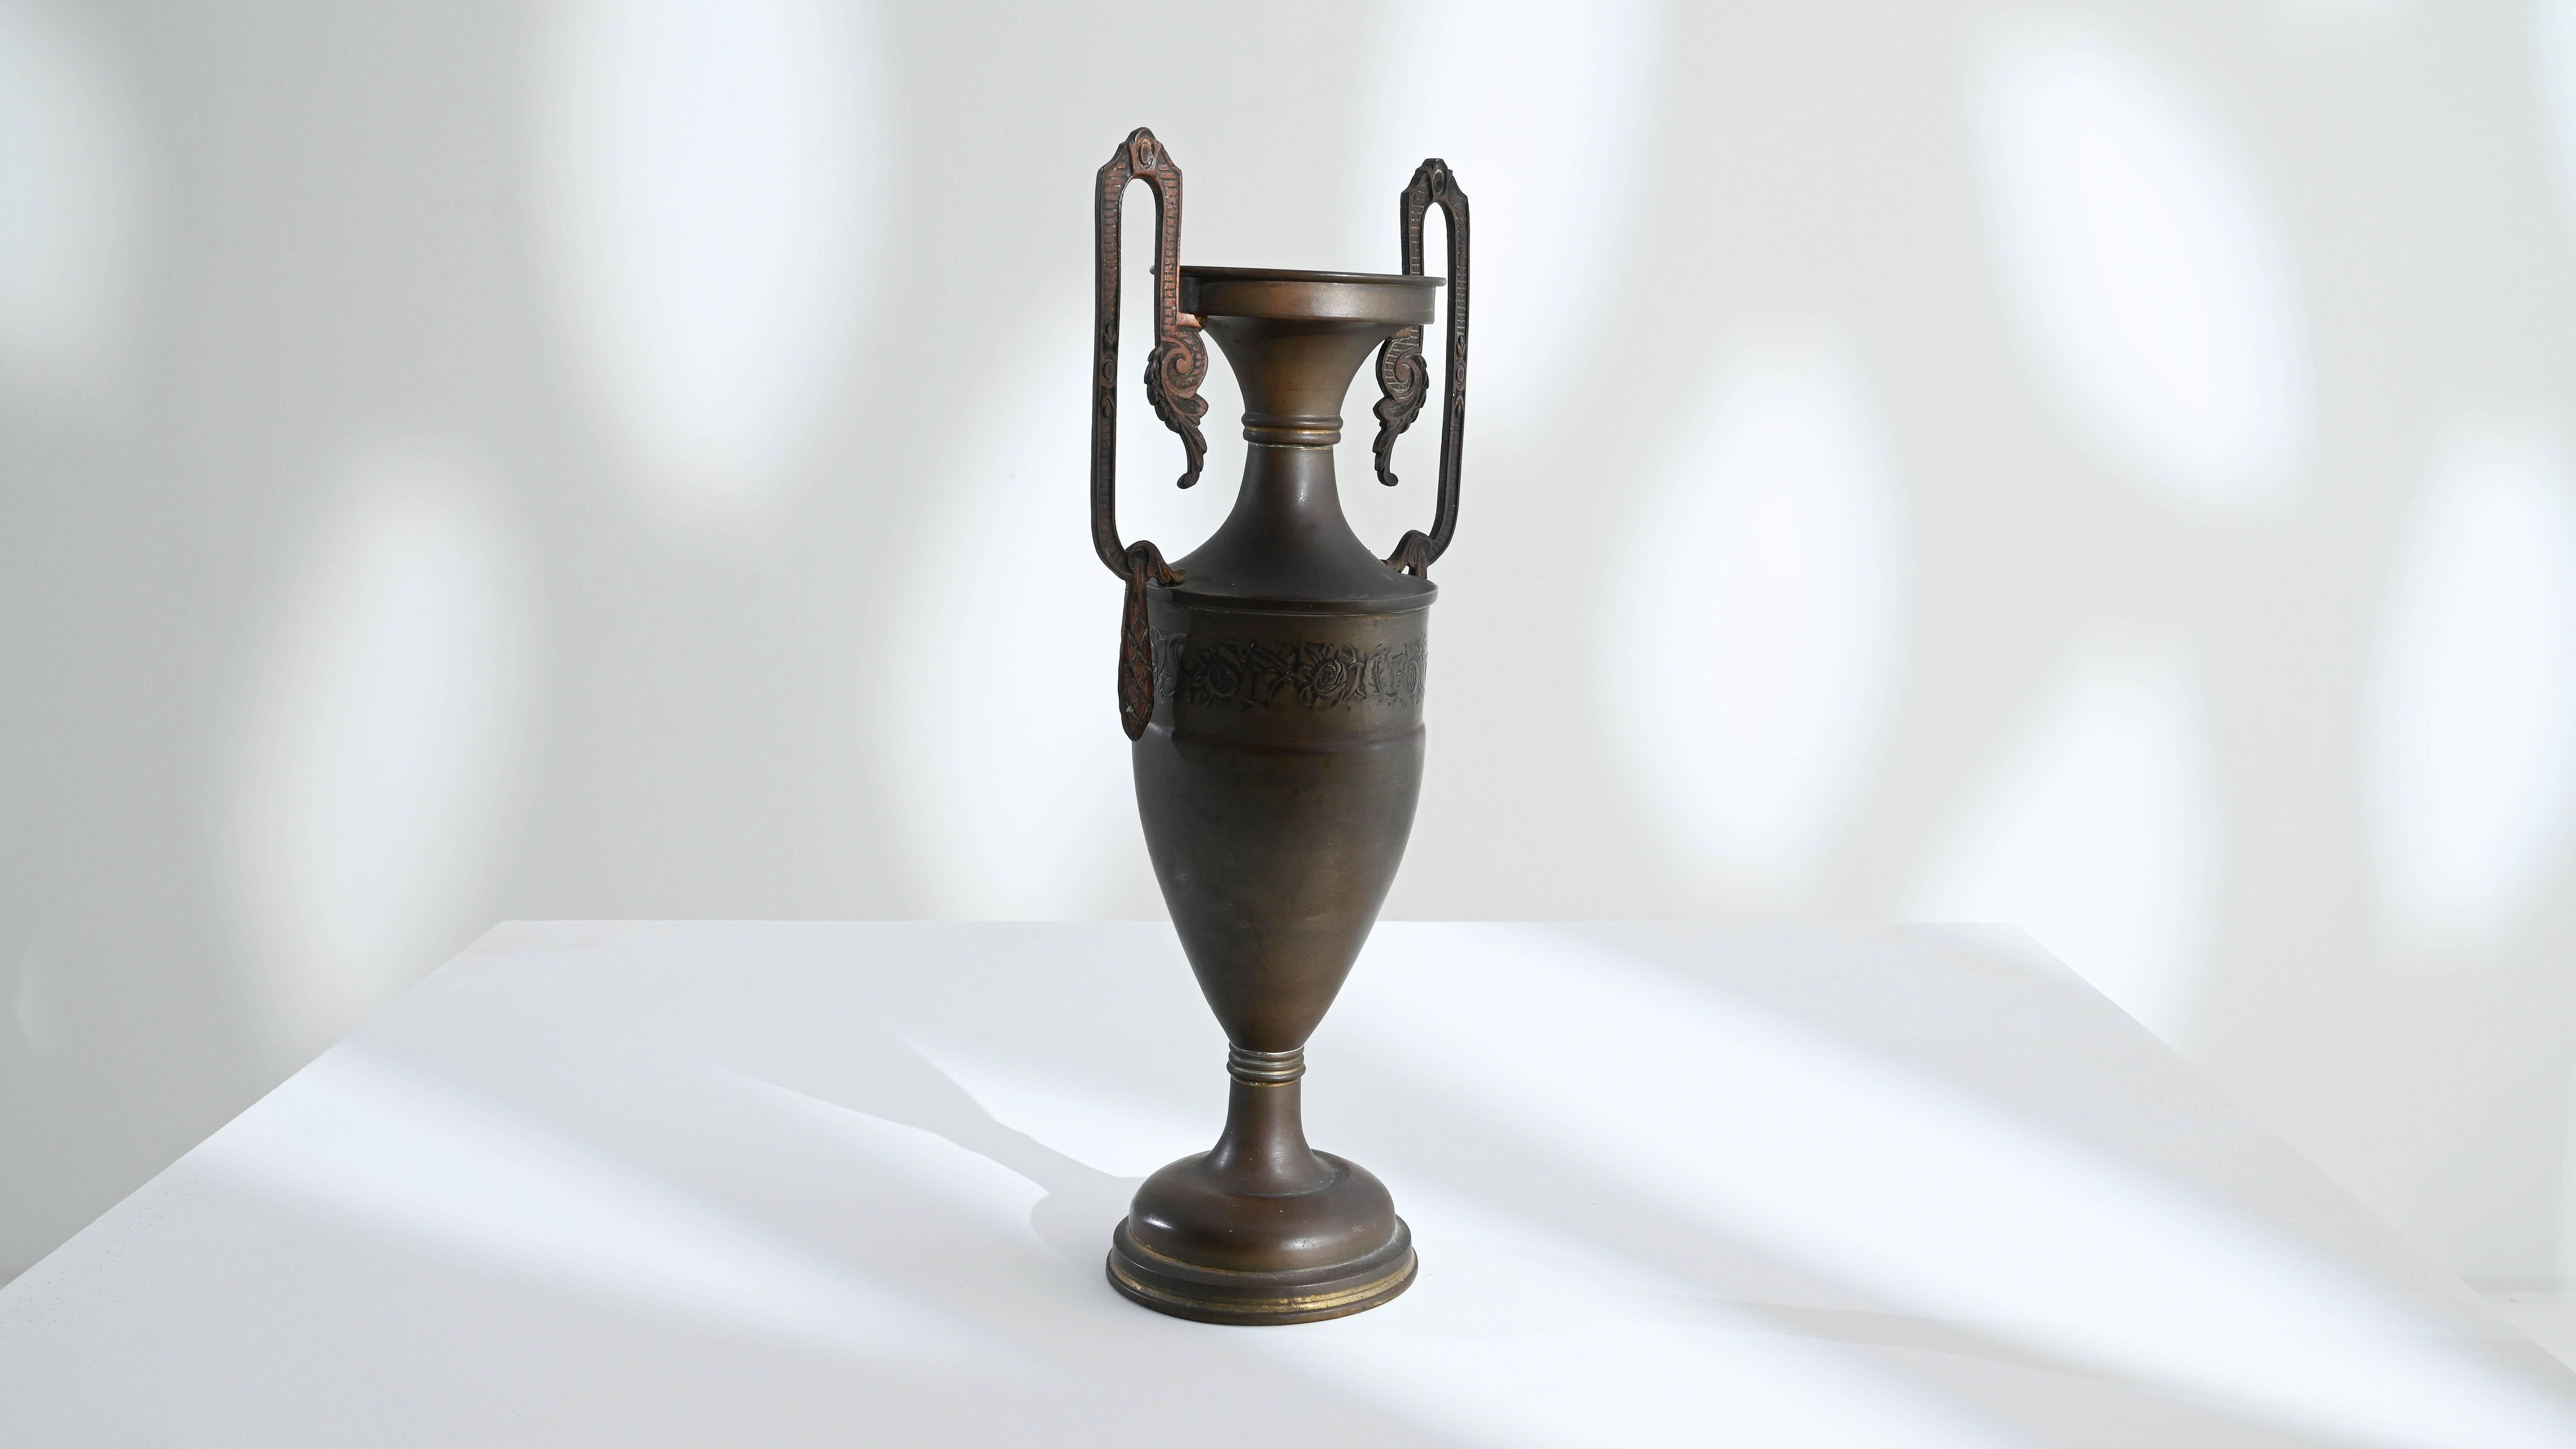 A metal vase created in 20th century France. With elaborate handles, a delicately tapered vessel body, and no shortage of lovingly crafted details, this vase stuns the eye with its attention to detail and hand-made craftsmanship. Painstakingly